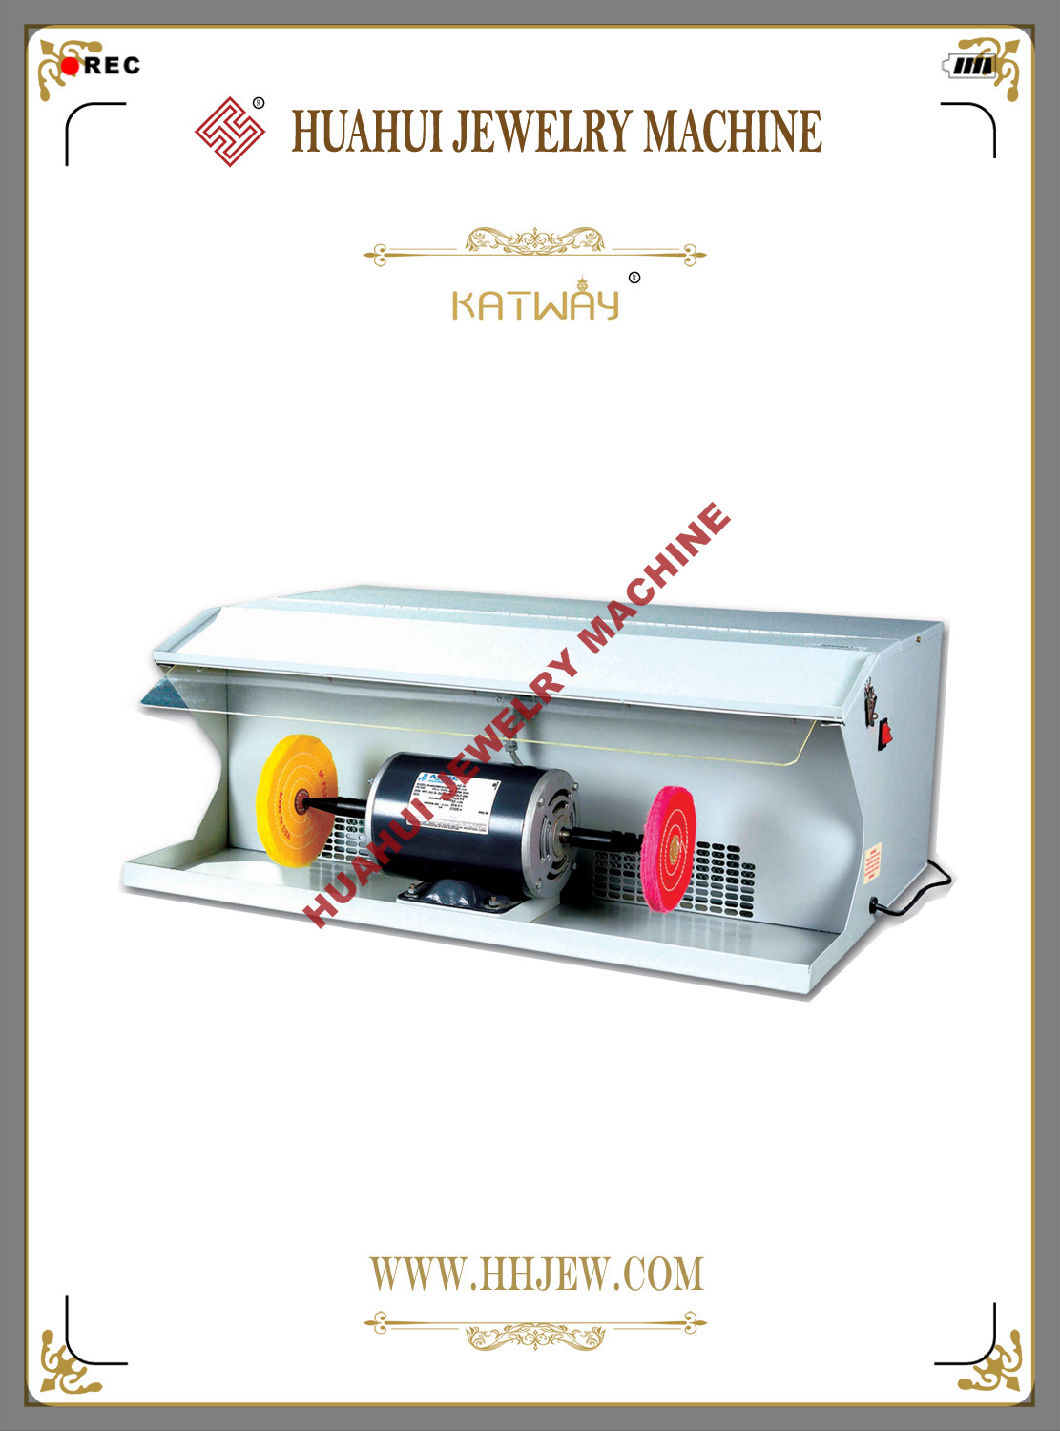 Jewelry Polishing Machine with Dust Collector Jewelry Making Tools Bench Grinder, Huahui Jewelry Machine & Jewelry Making Tools & Goldsmith Equipment